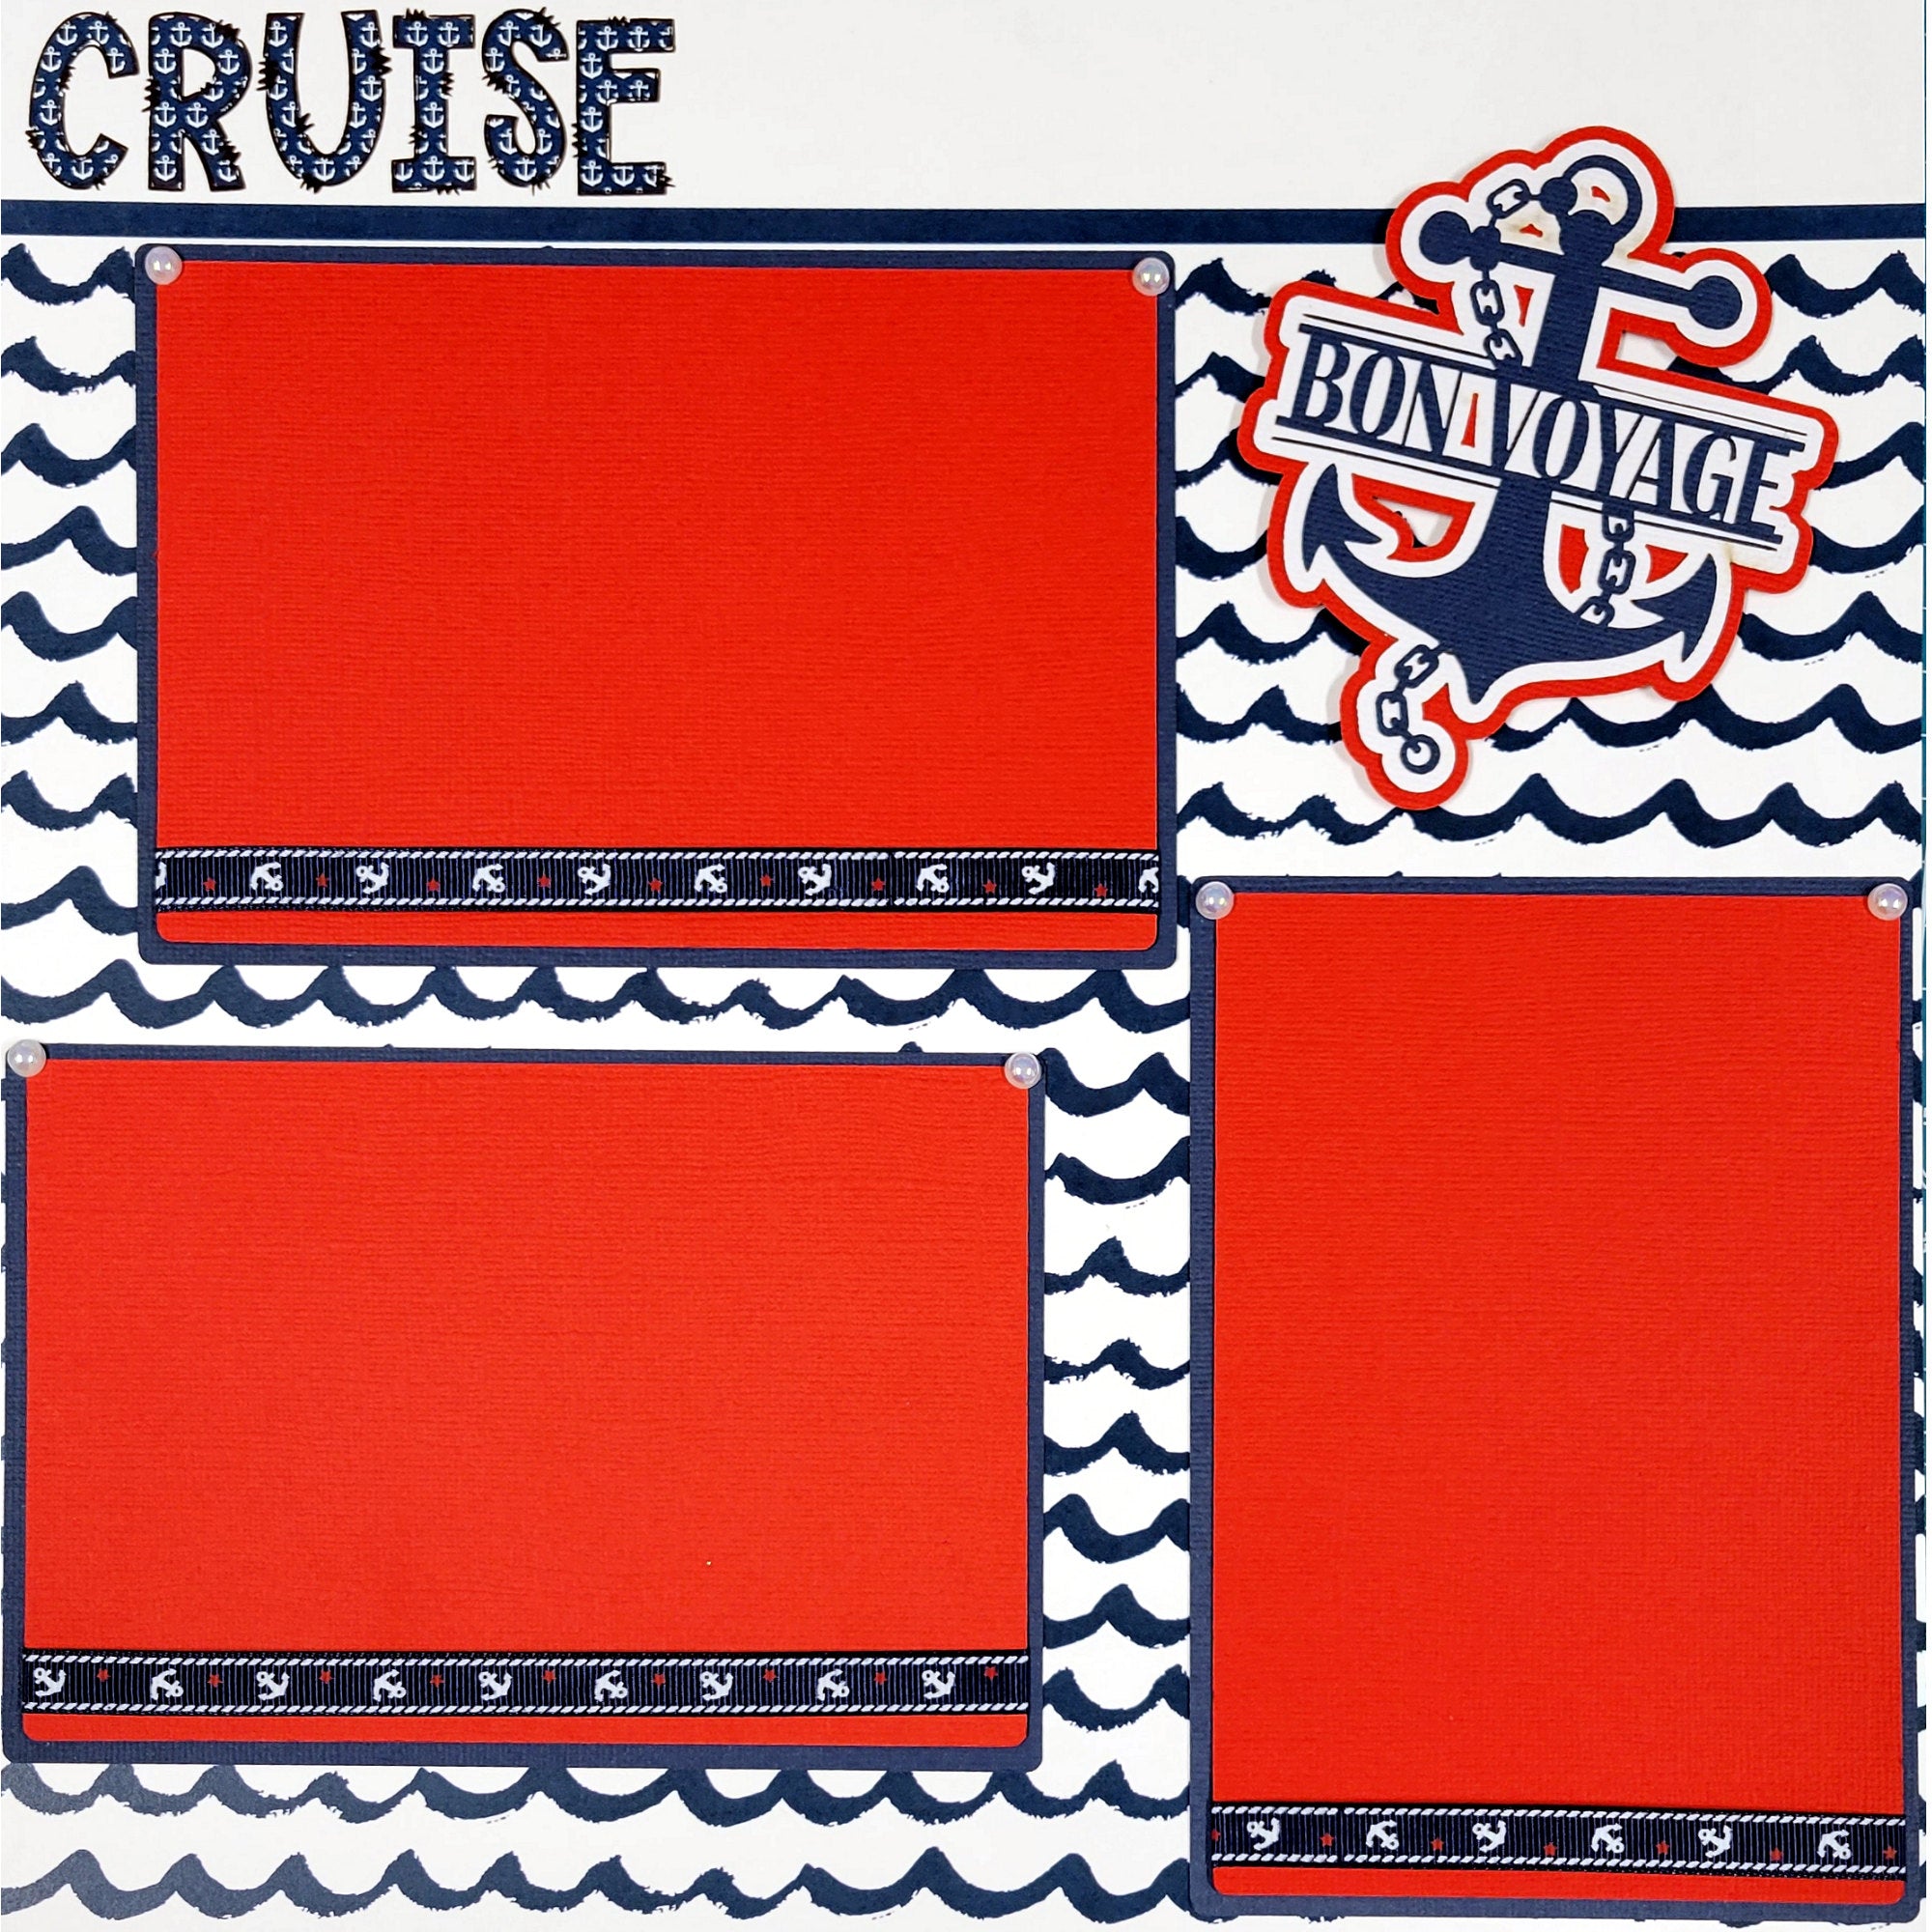 Cruising the world...one port at a time (2) - 12 x 12 Pages, Fully-Assembled & Hand-Crafted 3D Scrapbook Premade by SSC Designs